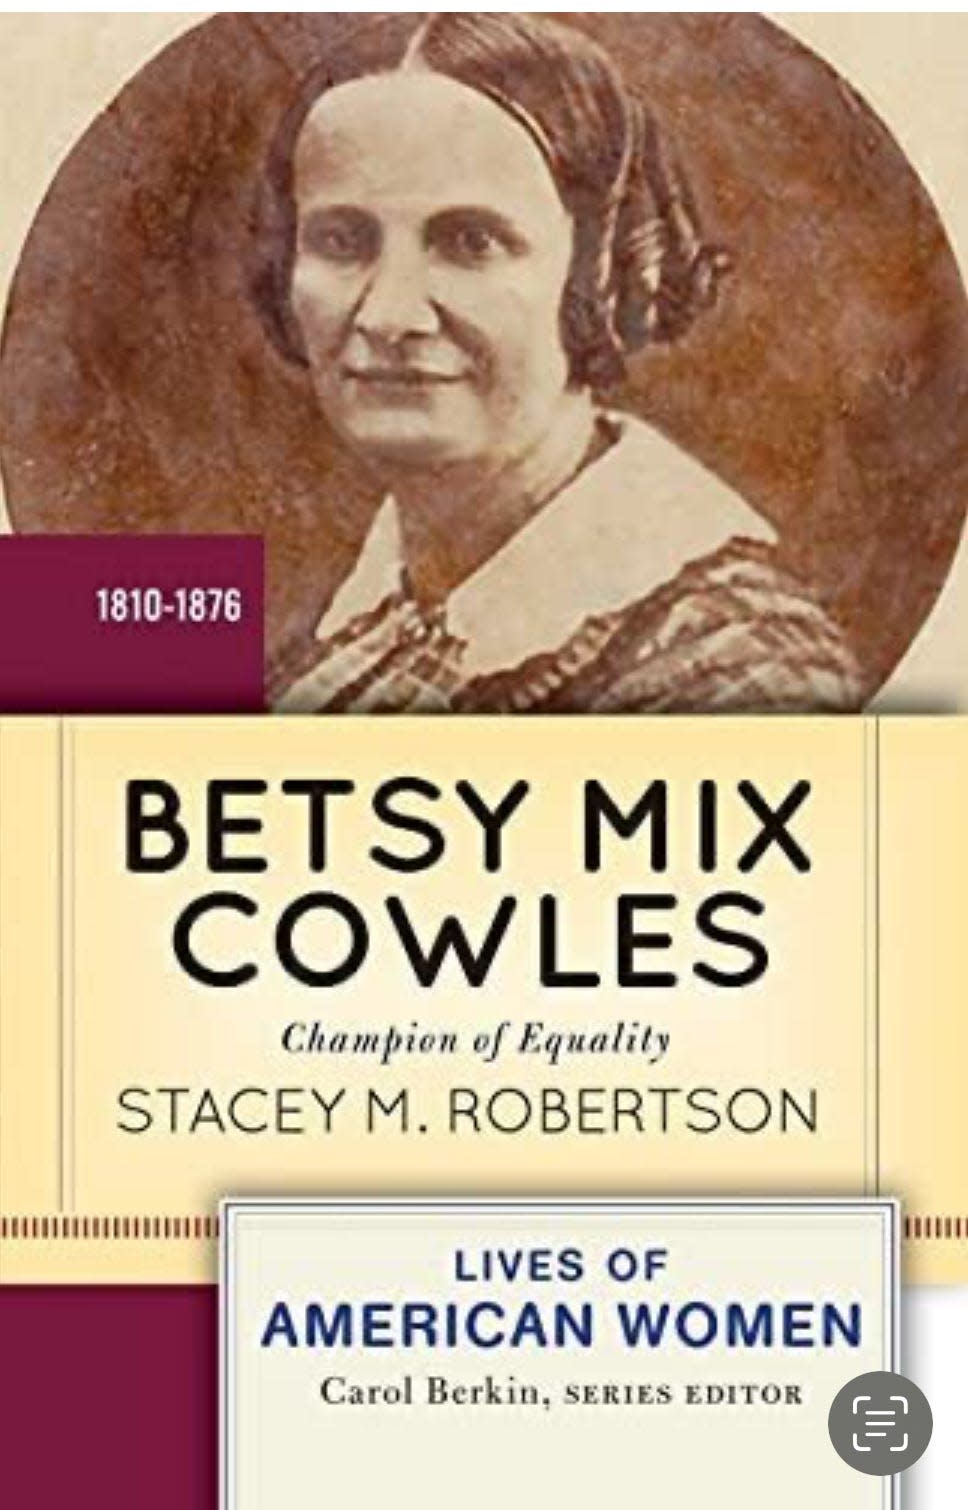 A book about Betsy Mix Cowles, a "Champion of Equality," reviews the life of the the northeast Ohio educator and advocate of human rights, who for years taught and worked toward her causes in Stark County.